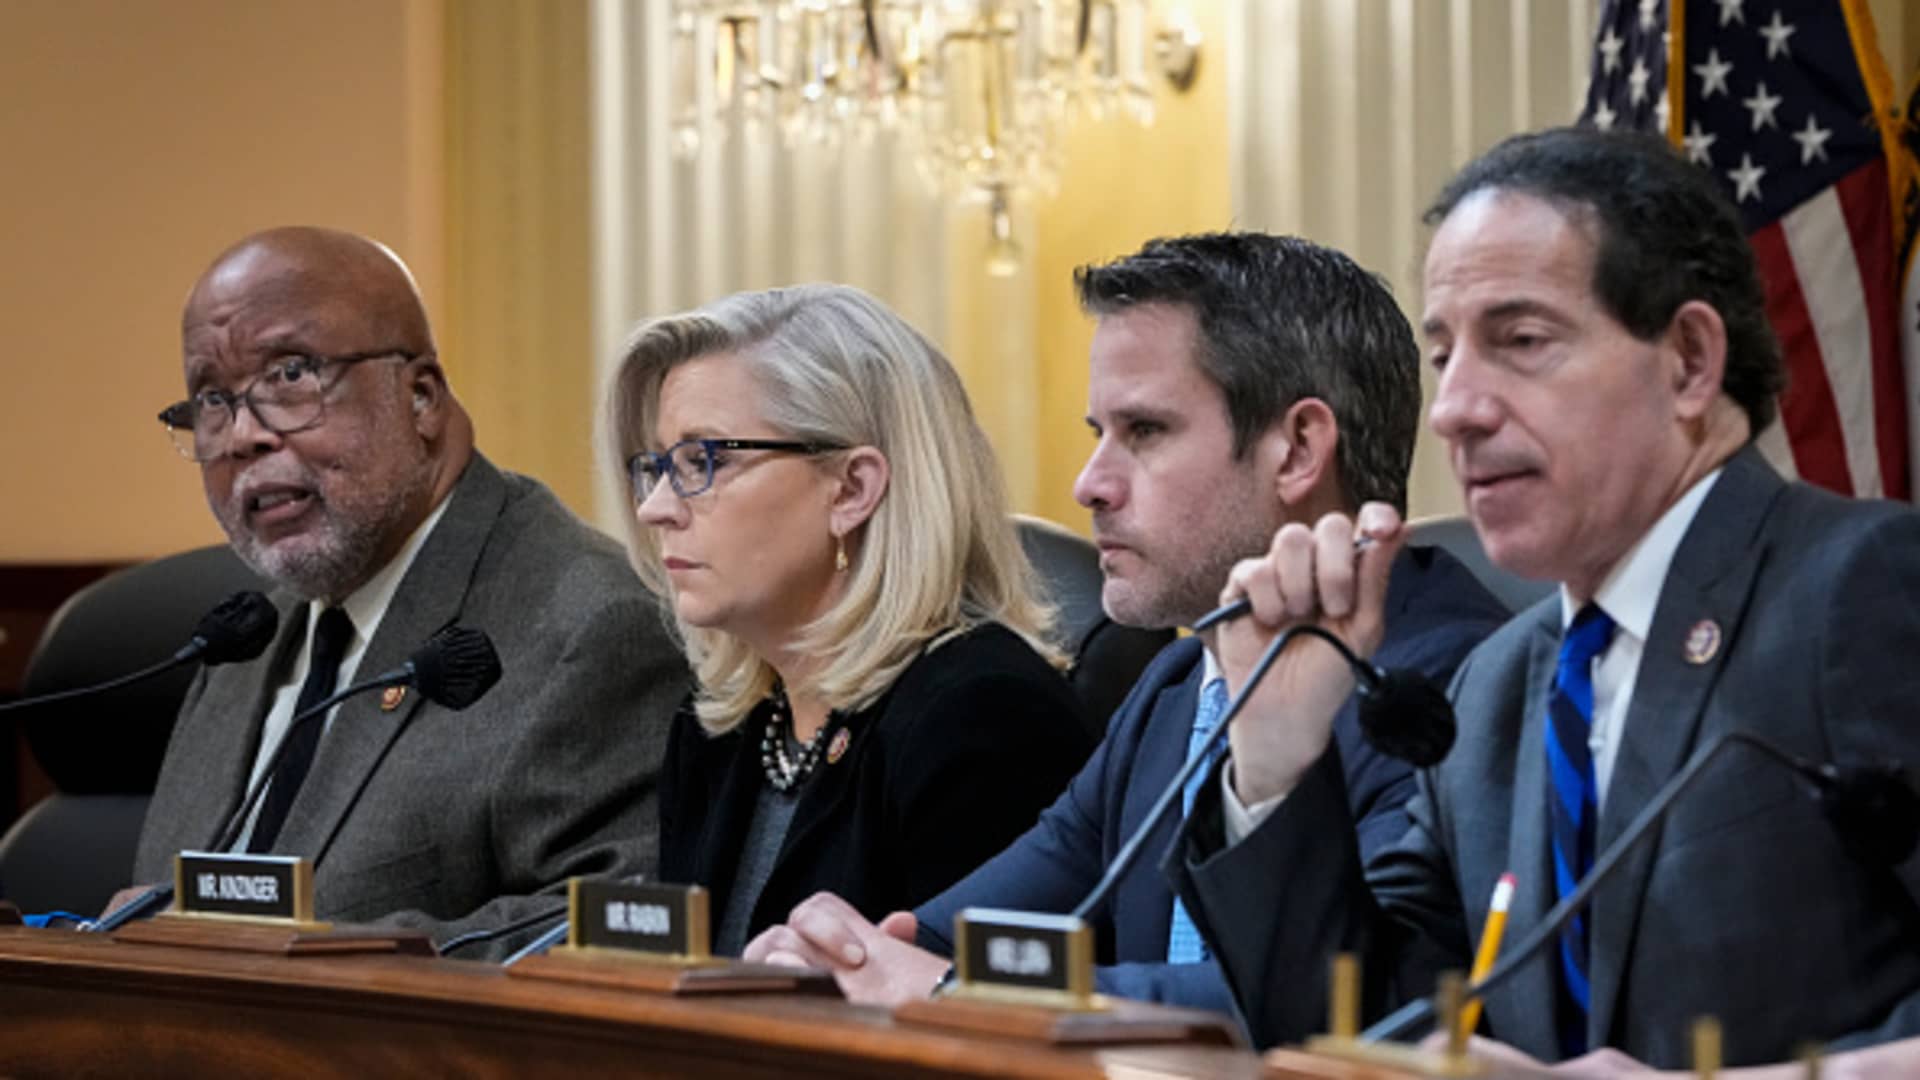 (L-R) Rep. Bennie Thompson (D-MS), chair of the select committee investigating the January 6 attack on the Capitol, speaks as Rep. Liz Cheney (R-WY), vice-chair of the select committee investigating the January 6 attack on the Capitol, Rep. Adam Kinzinger (R-IL) and Rep. Jamie Raskin (D-MD) listen during a committee meeting on Capitol Hill on December 1, 2021 in Washington, DC.